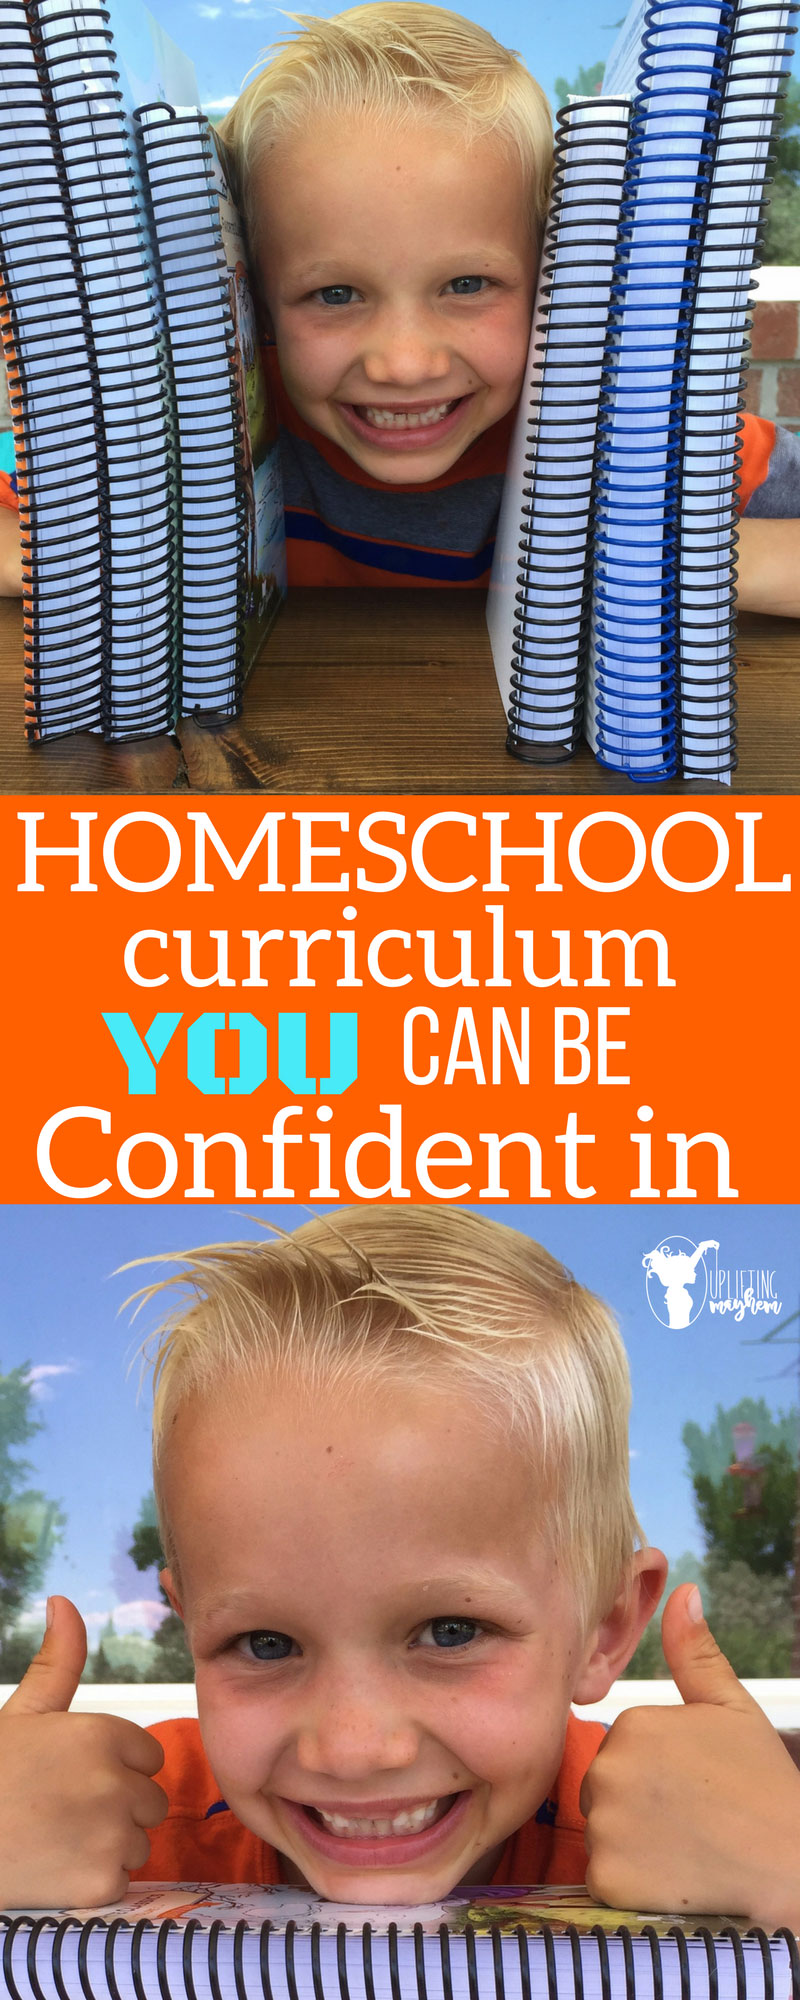 HOMESCHOOL curriculum you can be confident in!